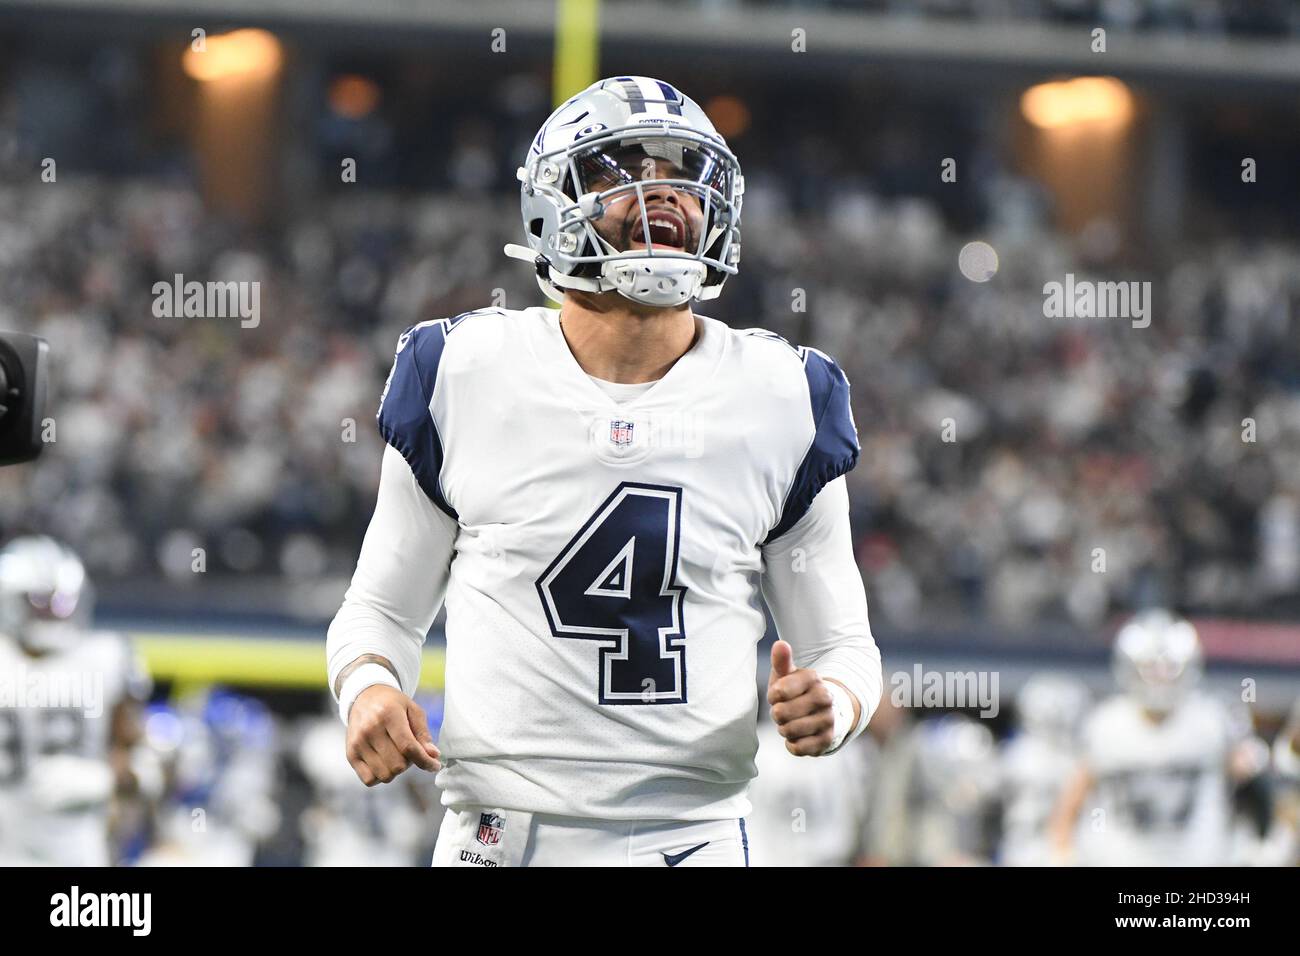 Arlington, United States. 02nd Jan, 2022. Dallas Cowboys qarterback yells as he enters the game against the Arizona Cardinals during their NFL game at AT&T Stadium in Arlington, Texas on Sunday, January 2, 2022. Photo by Ian Halperin/UPI Credit: UPI/Alamy Live News Stock Photo